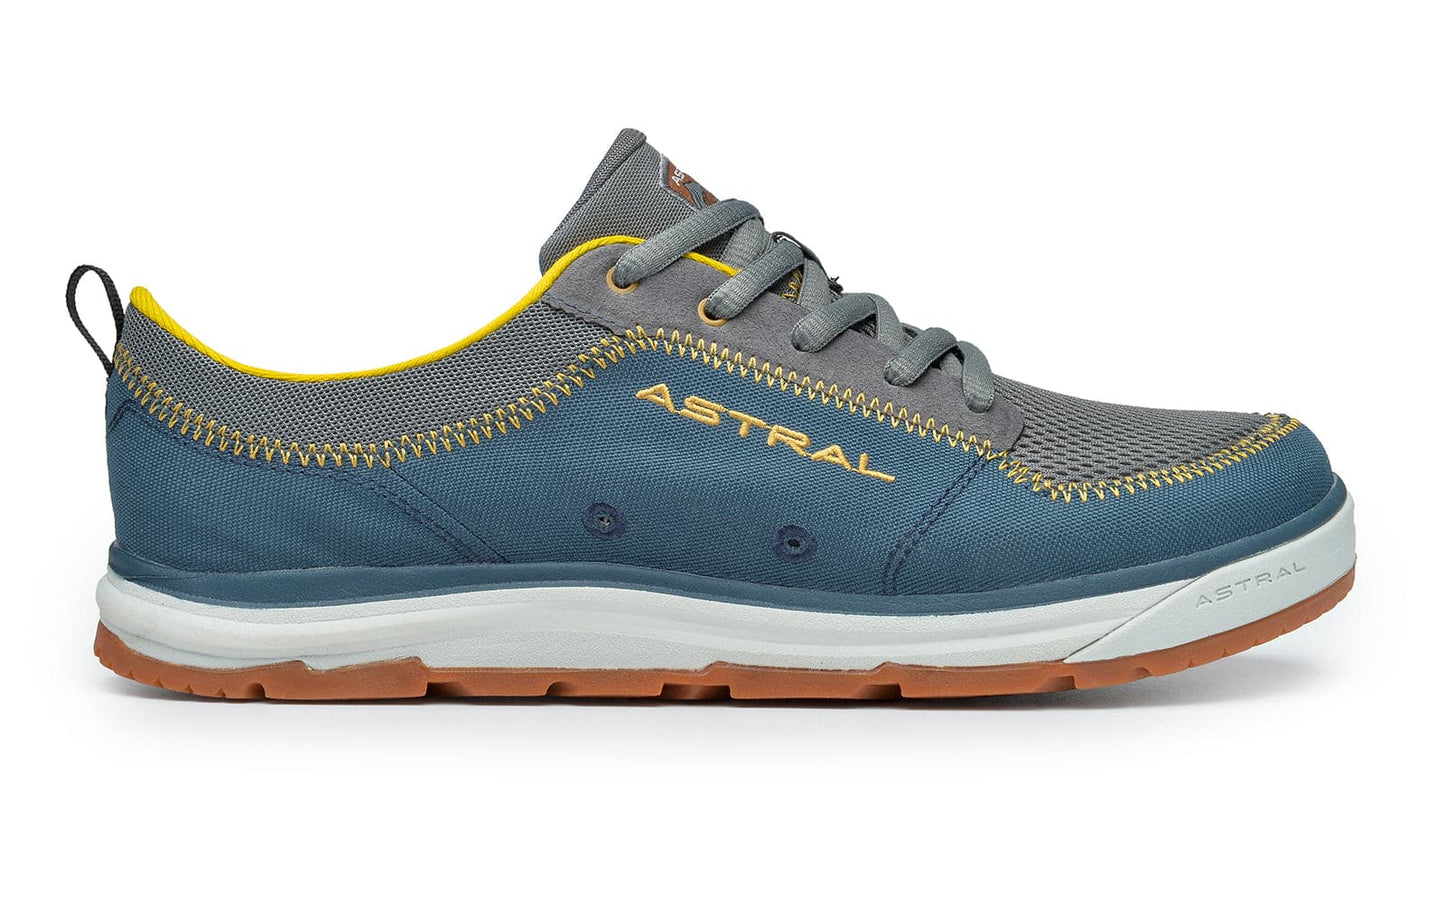 Featuring the Brewer 2.0 - Men's men's footwear, watersports manufactured by Astral shown here from an eighth angle.